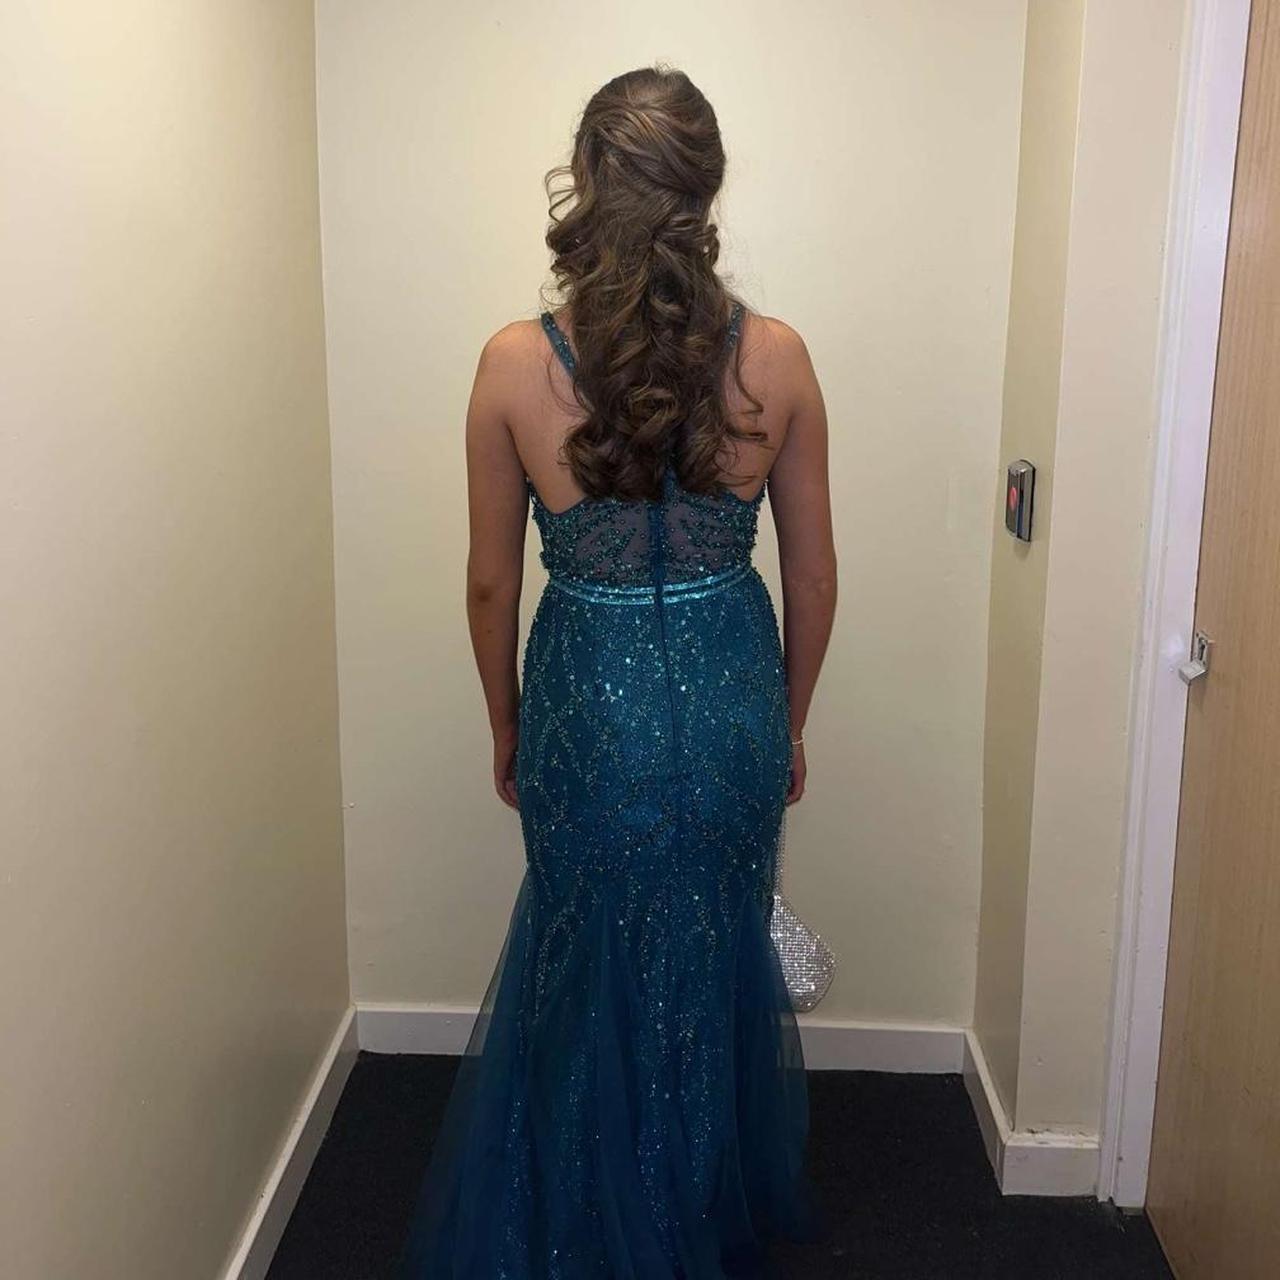 Stunning debs dress for sale, sourced from Northern... - Depop